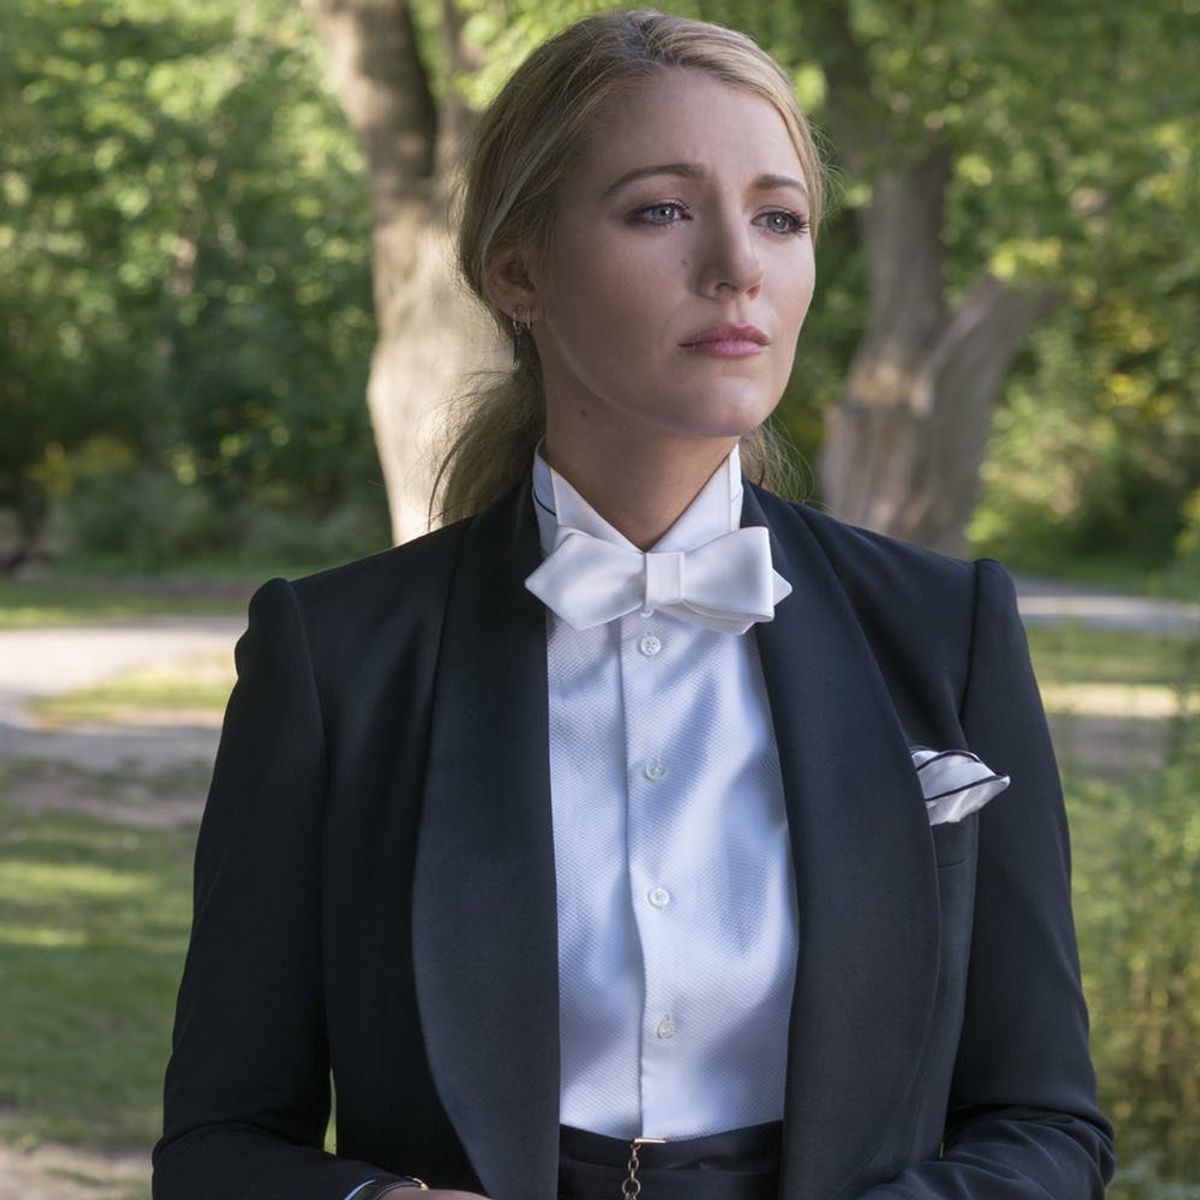 Brit + Co’s Weekly Entertainment Planner: ‘A Simple Favor,’ ‘BIP’ Season Finale, and More!